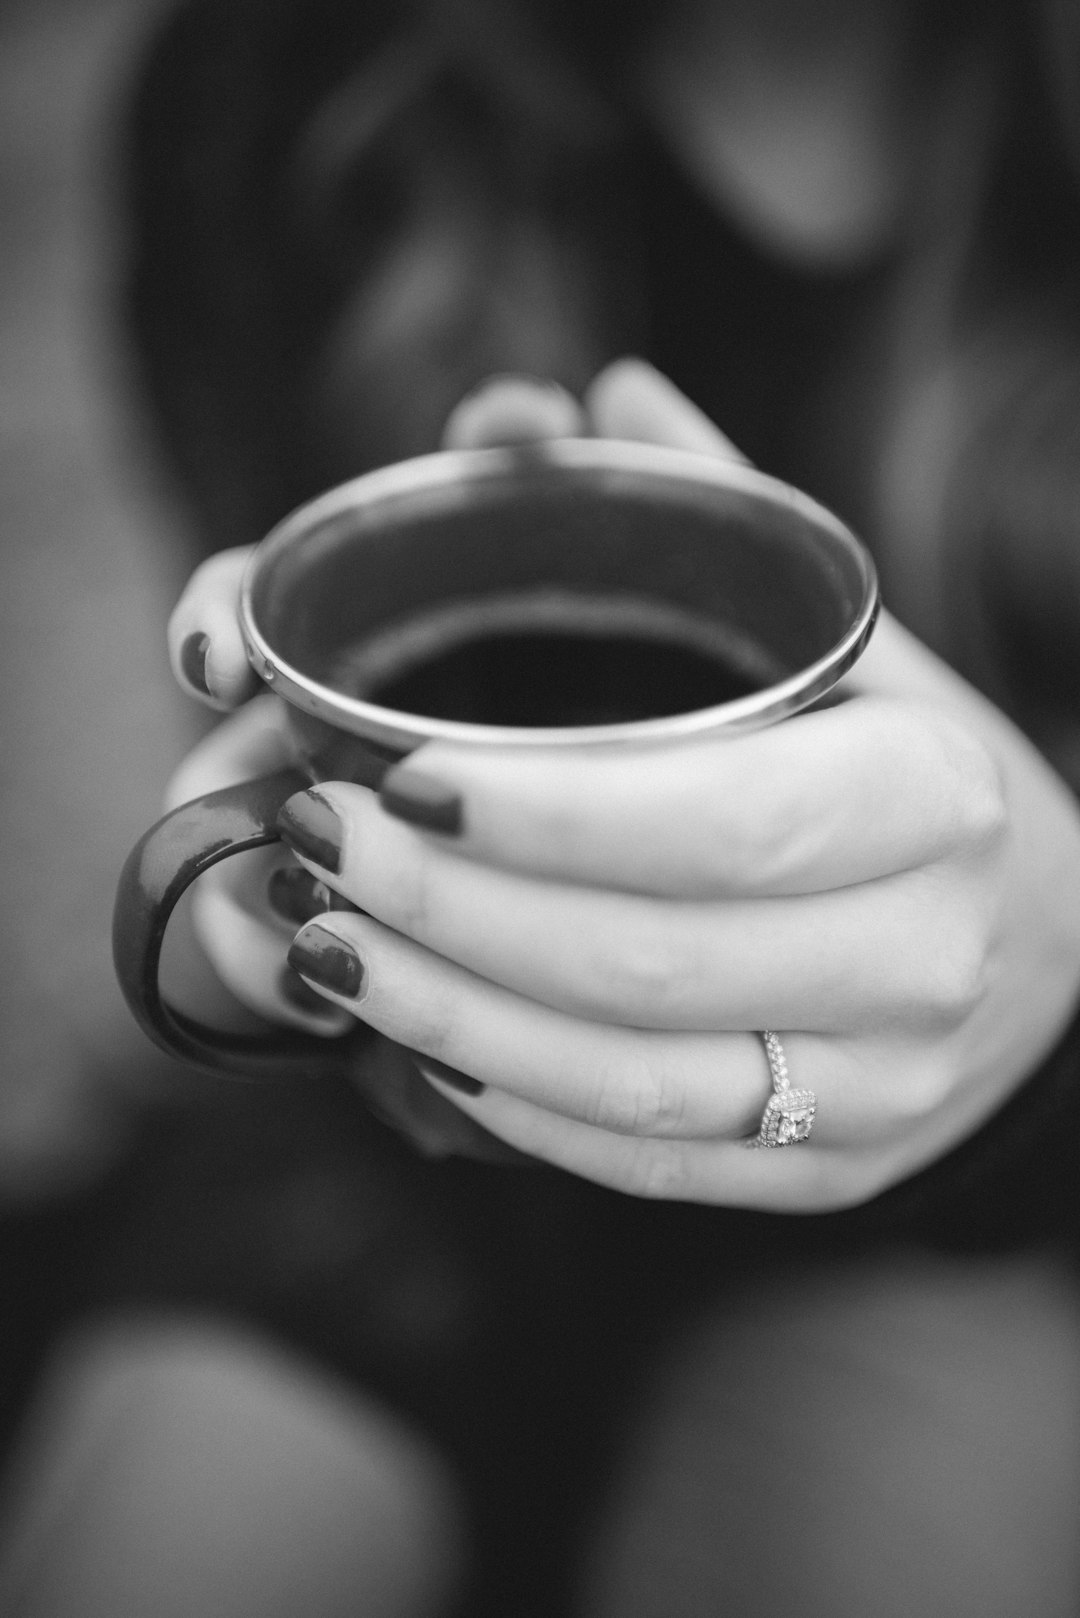 Black and white photography of a female’s hands holding a coffee mug with an engagement ring on it, in a minimalistic setting. –ar 85:128